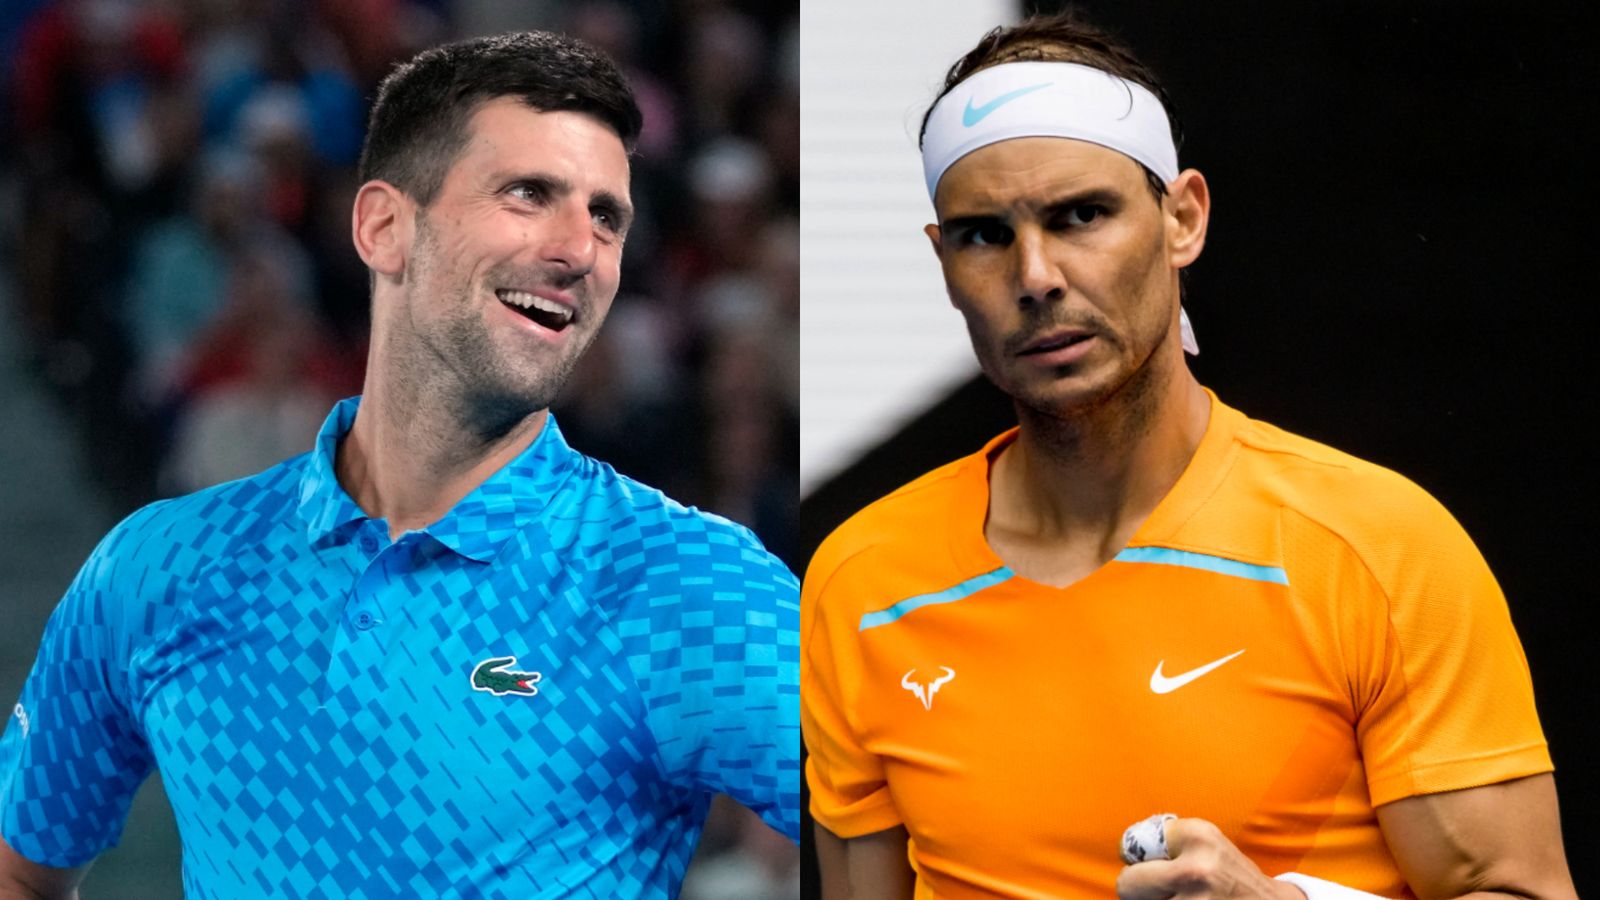 French Open: Roland Garros could see Novak Djokovic and Rafael Nadal collide for Grand Slam supremacy | Tennis News